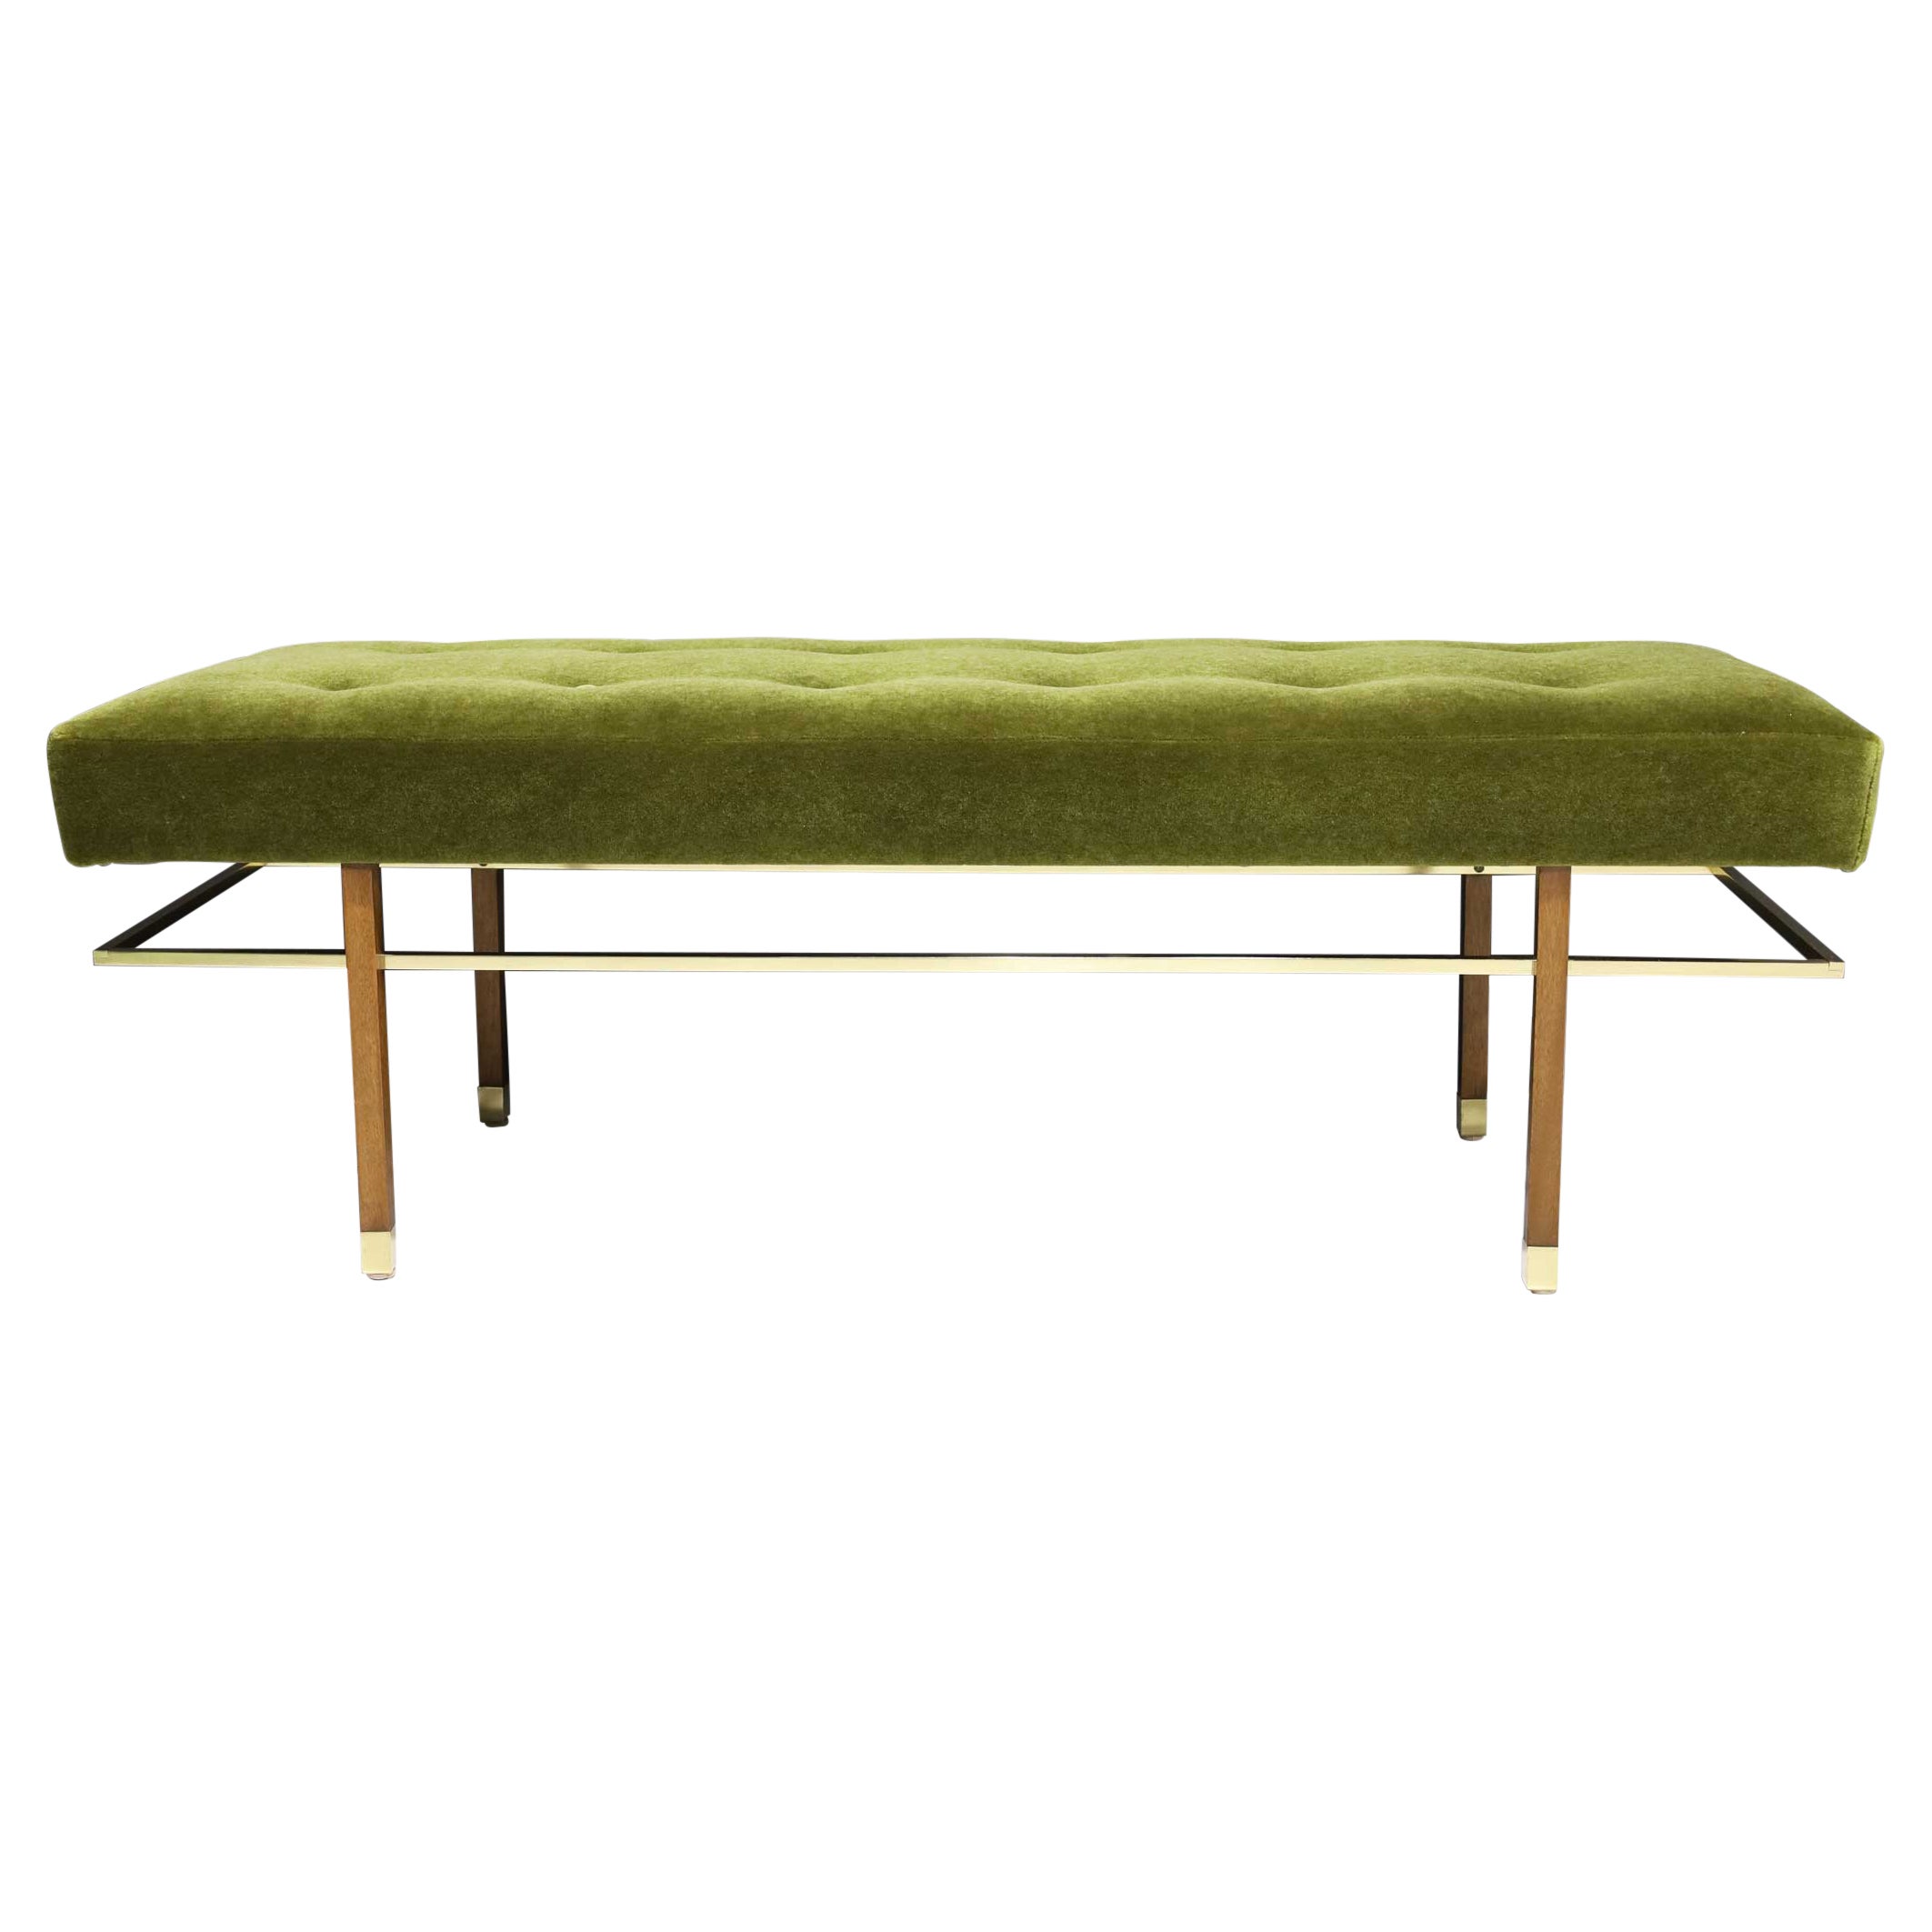 Harvey Probber Bench in Mahogany, Brass and Lush Green Mohair